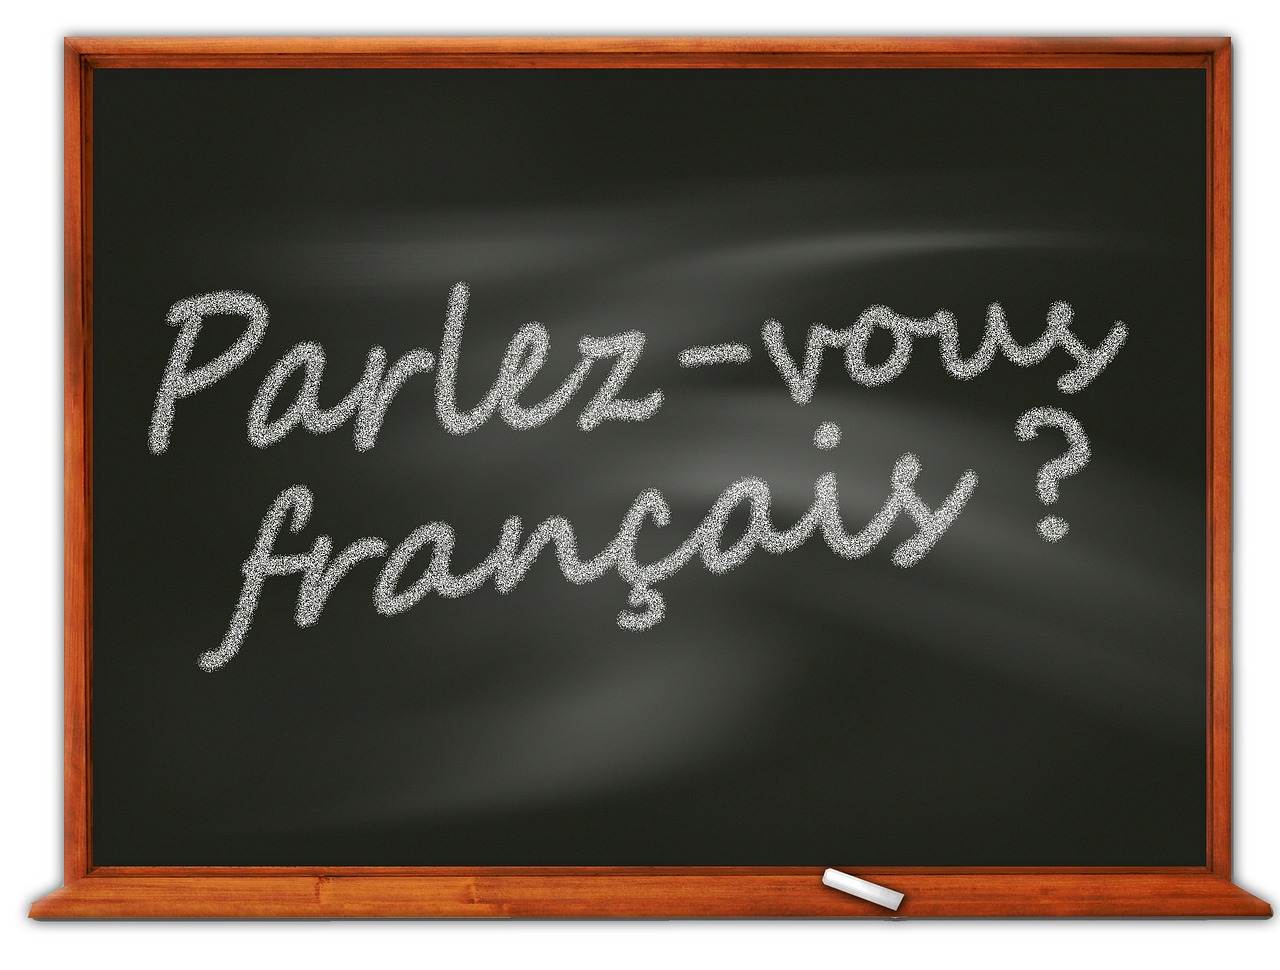 Frans - e-learning & coaching